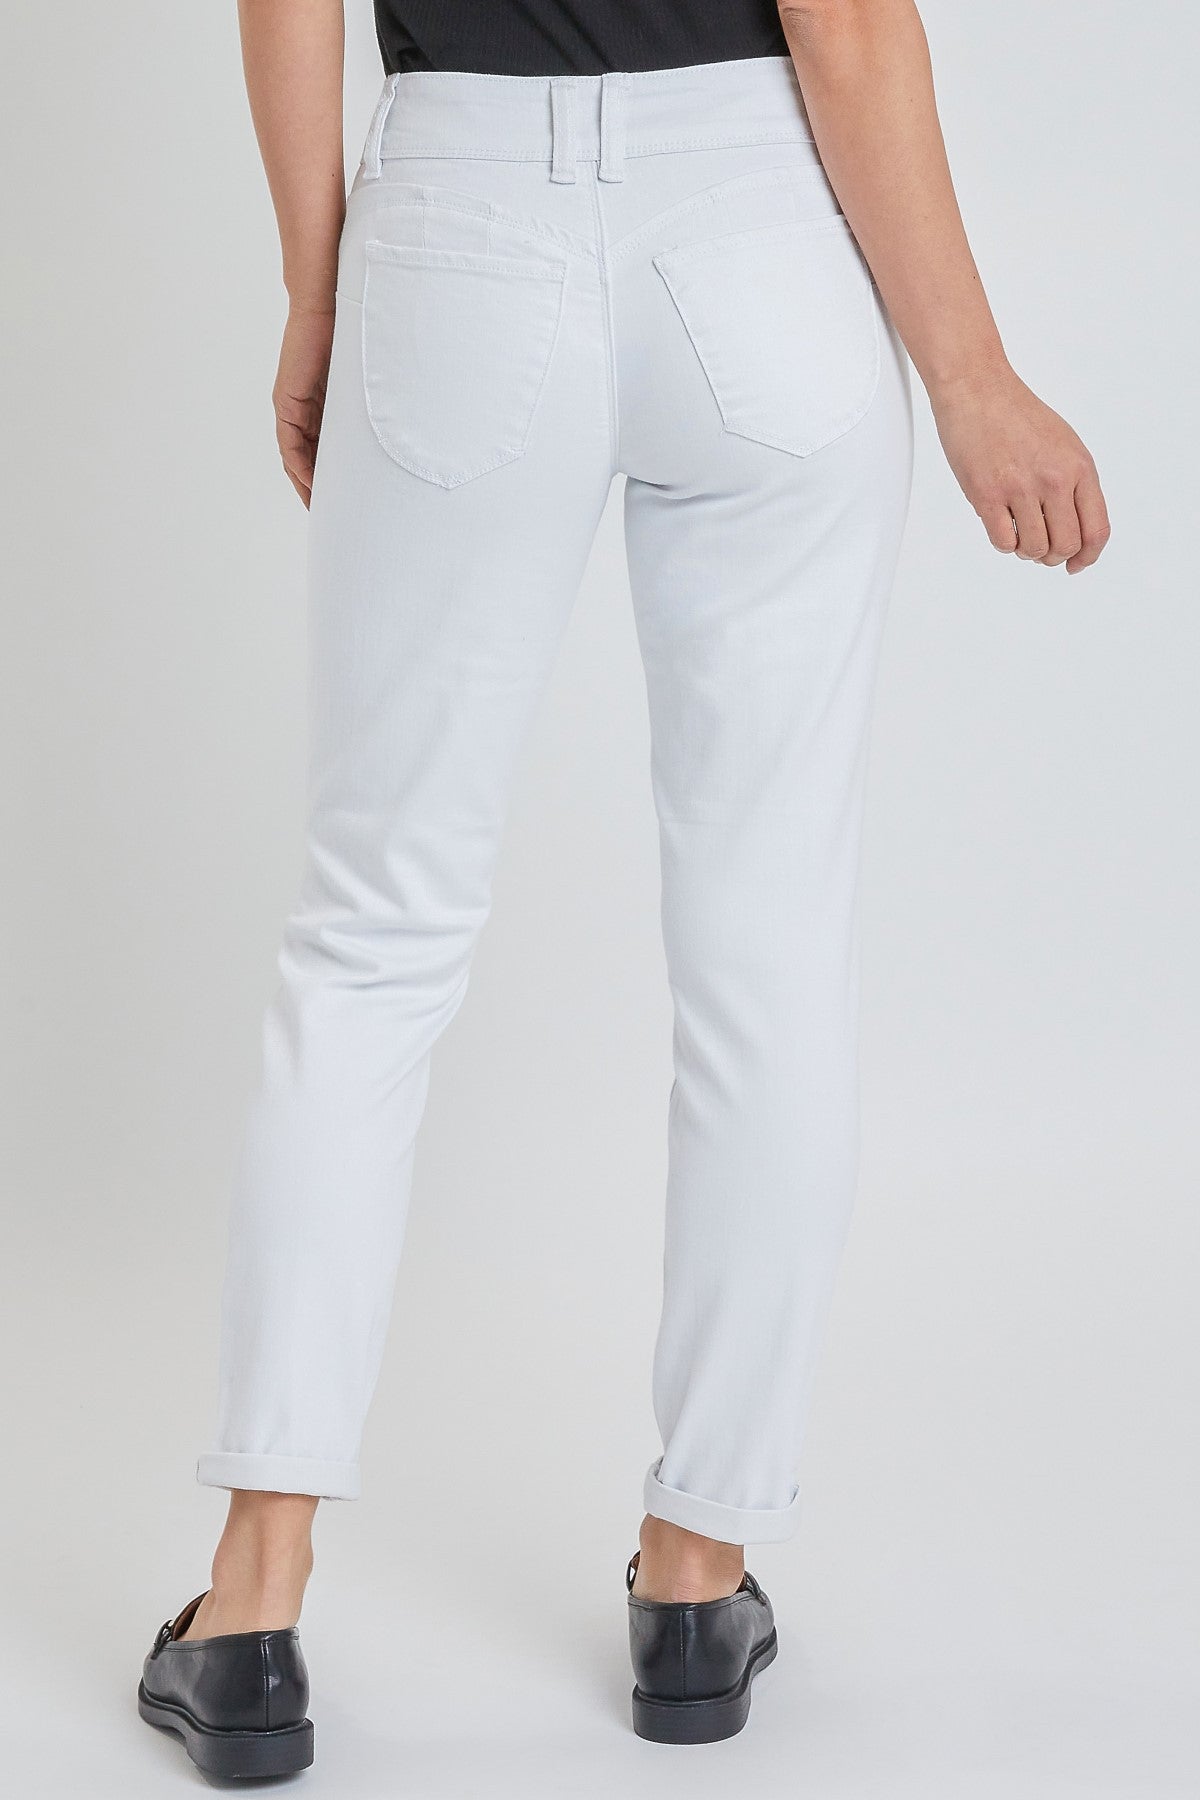 Let It Go Betta Butt White Jeans By Royalty